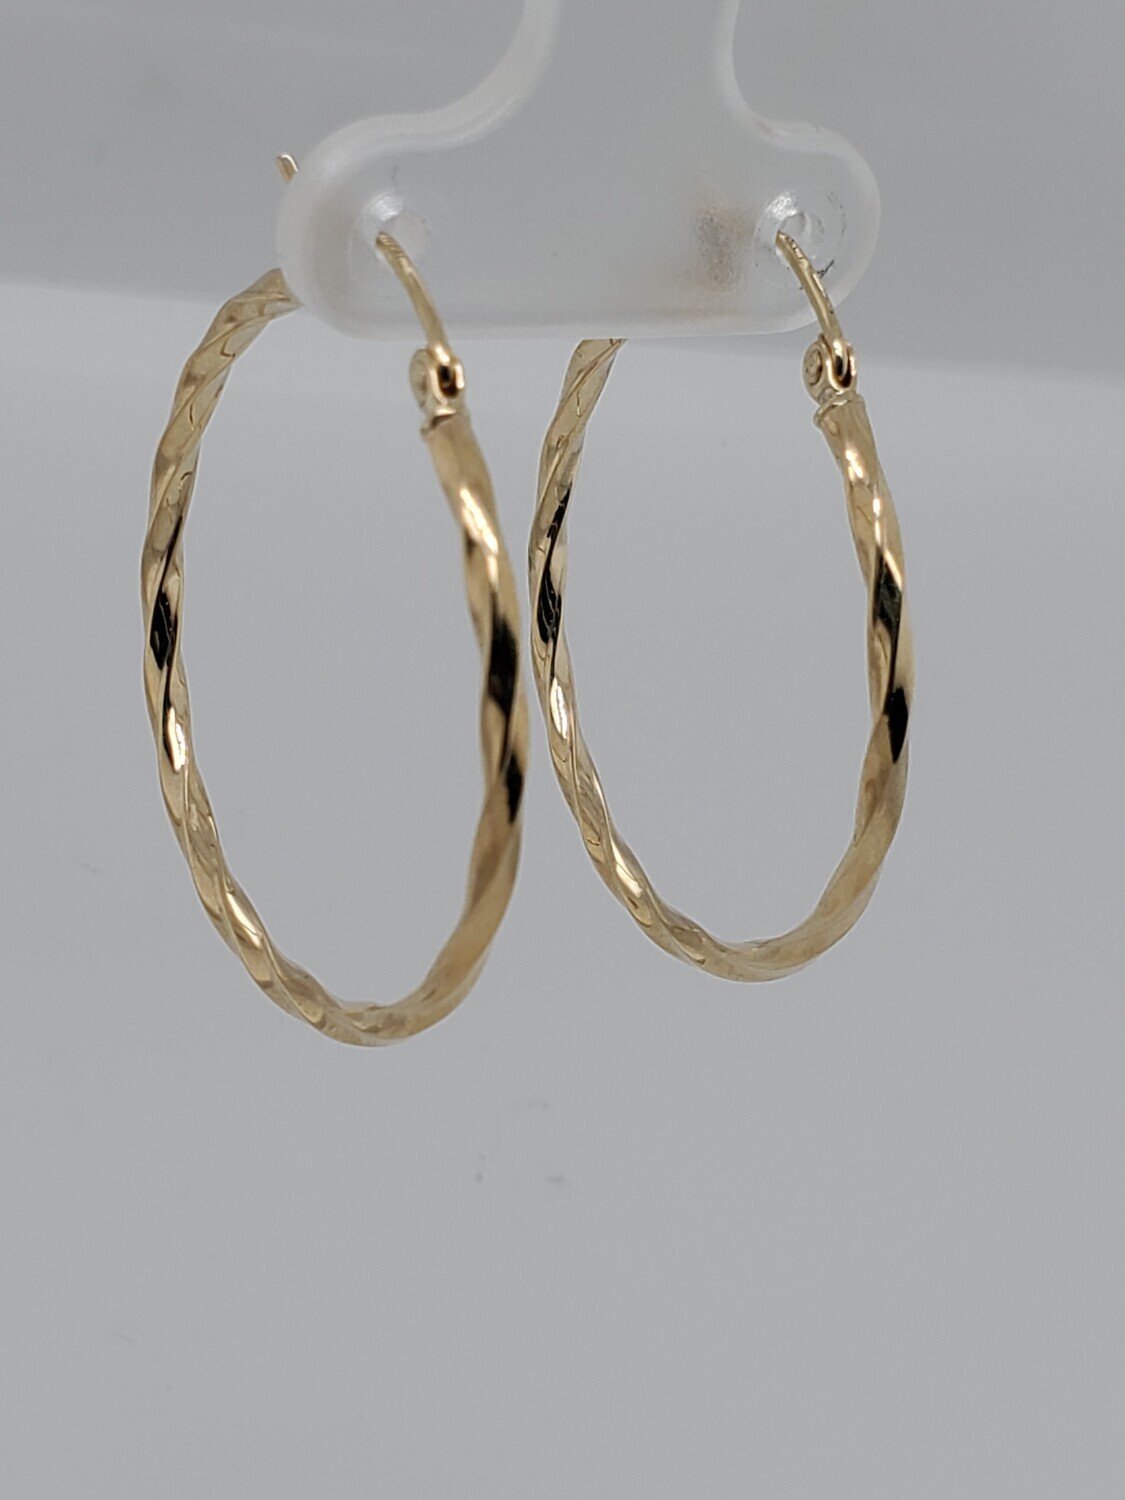 BRAND NEW!! 10KT TWISTED HOOP EARRINGS  INVENTORY # I-18345 75TH AVE